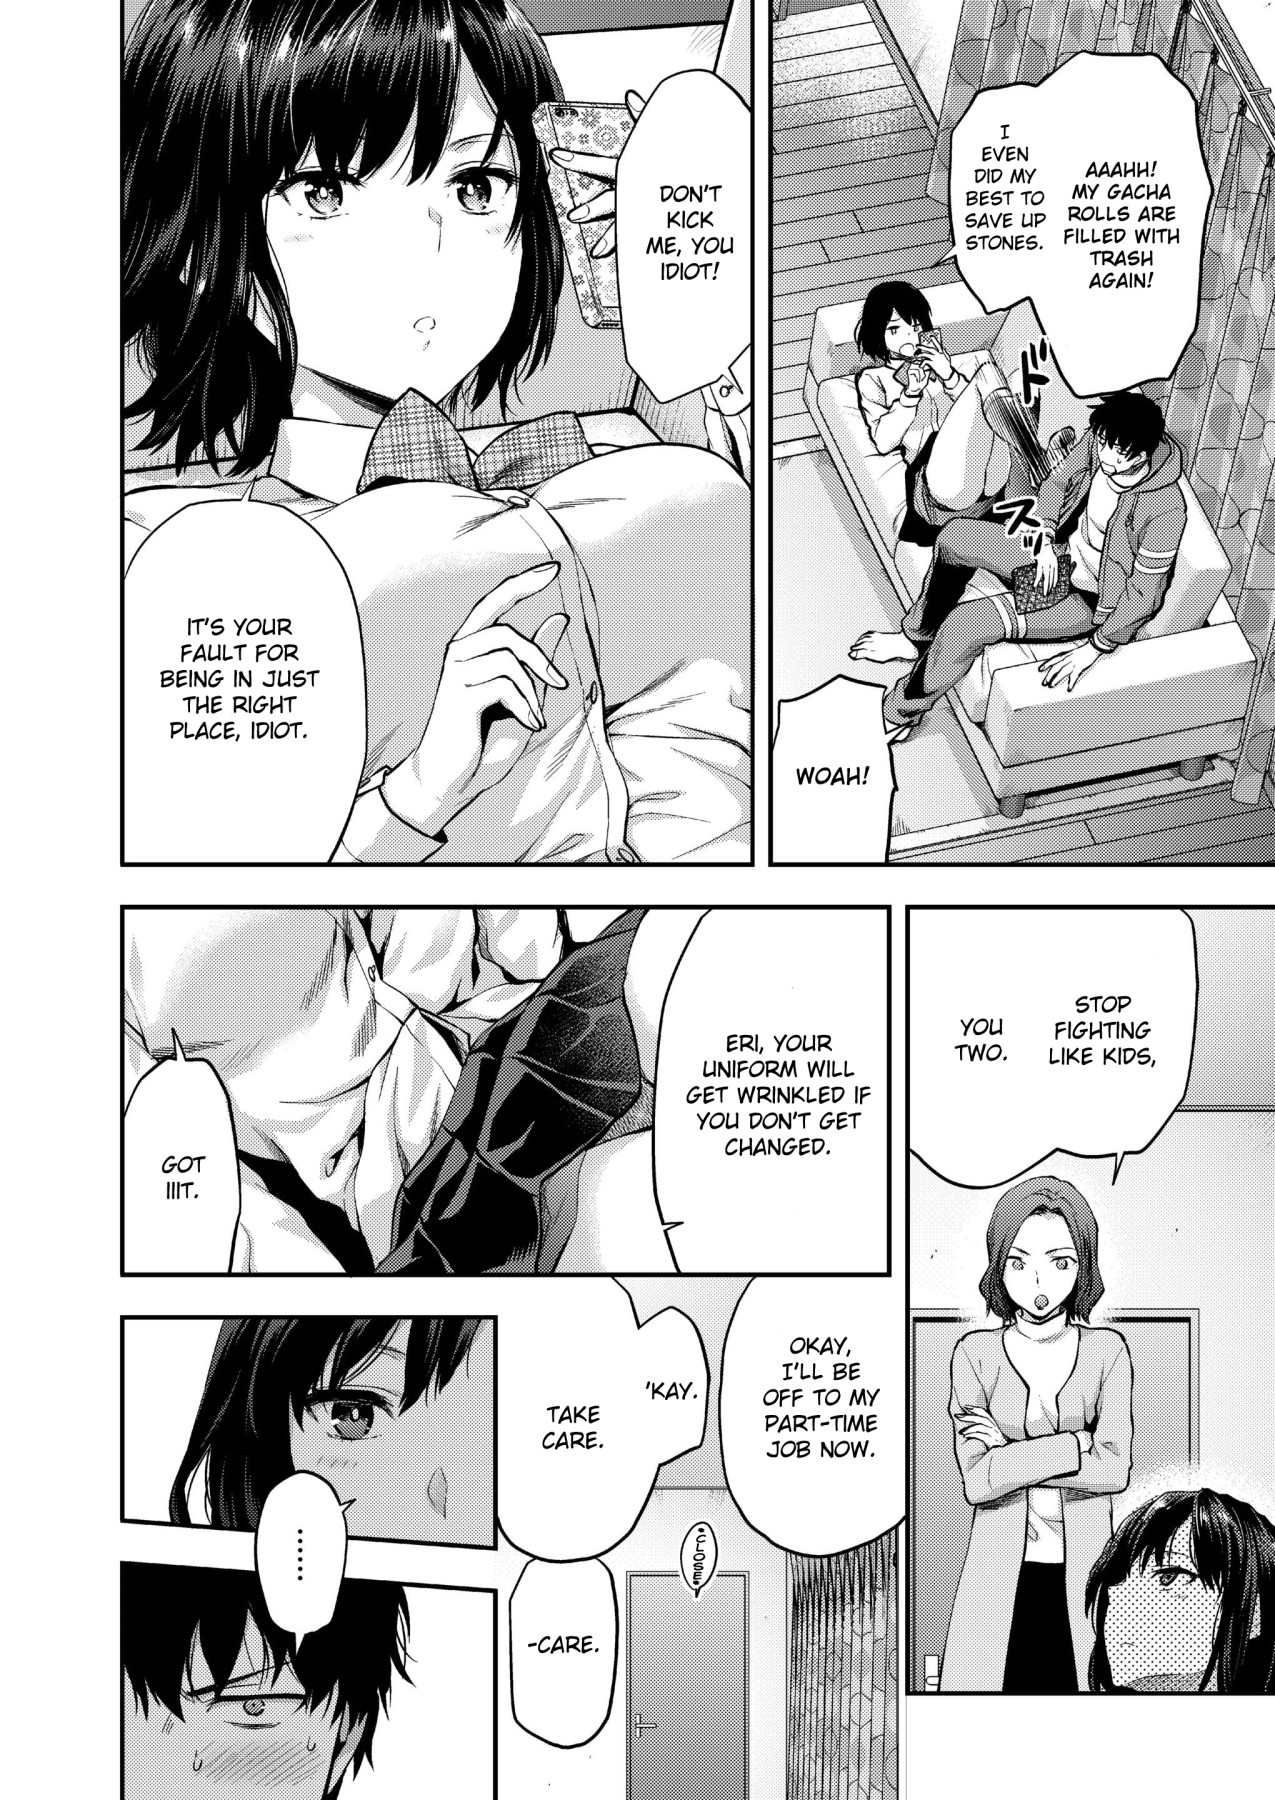 Hentai Manga Comic-Eri and Her Older Brother on a Certain Day-Read-2